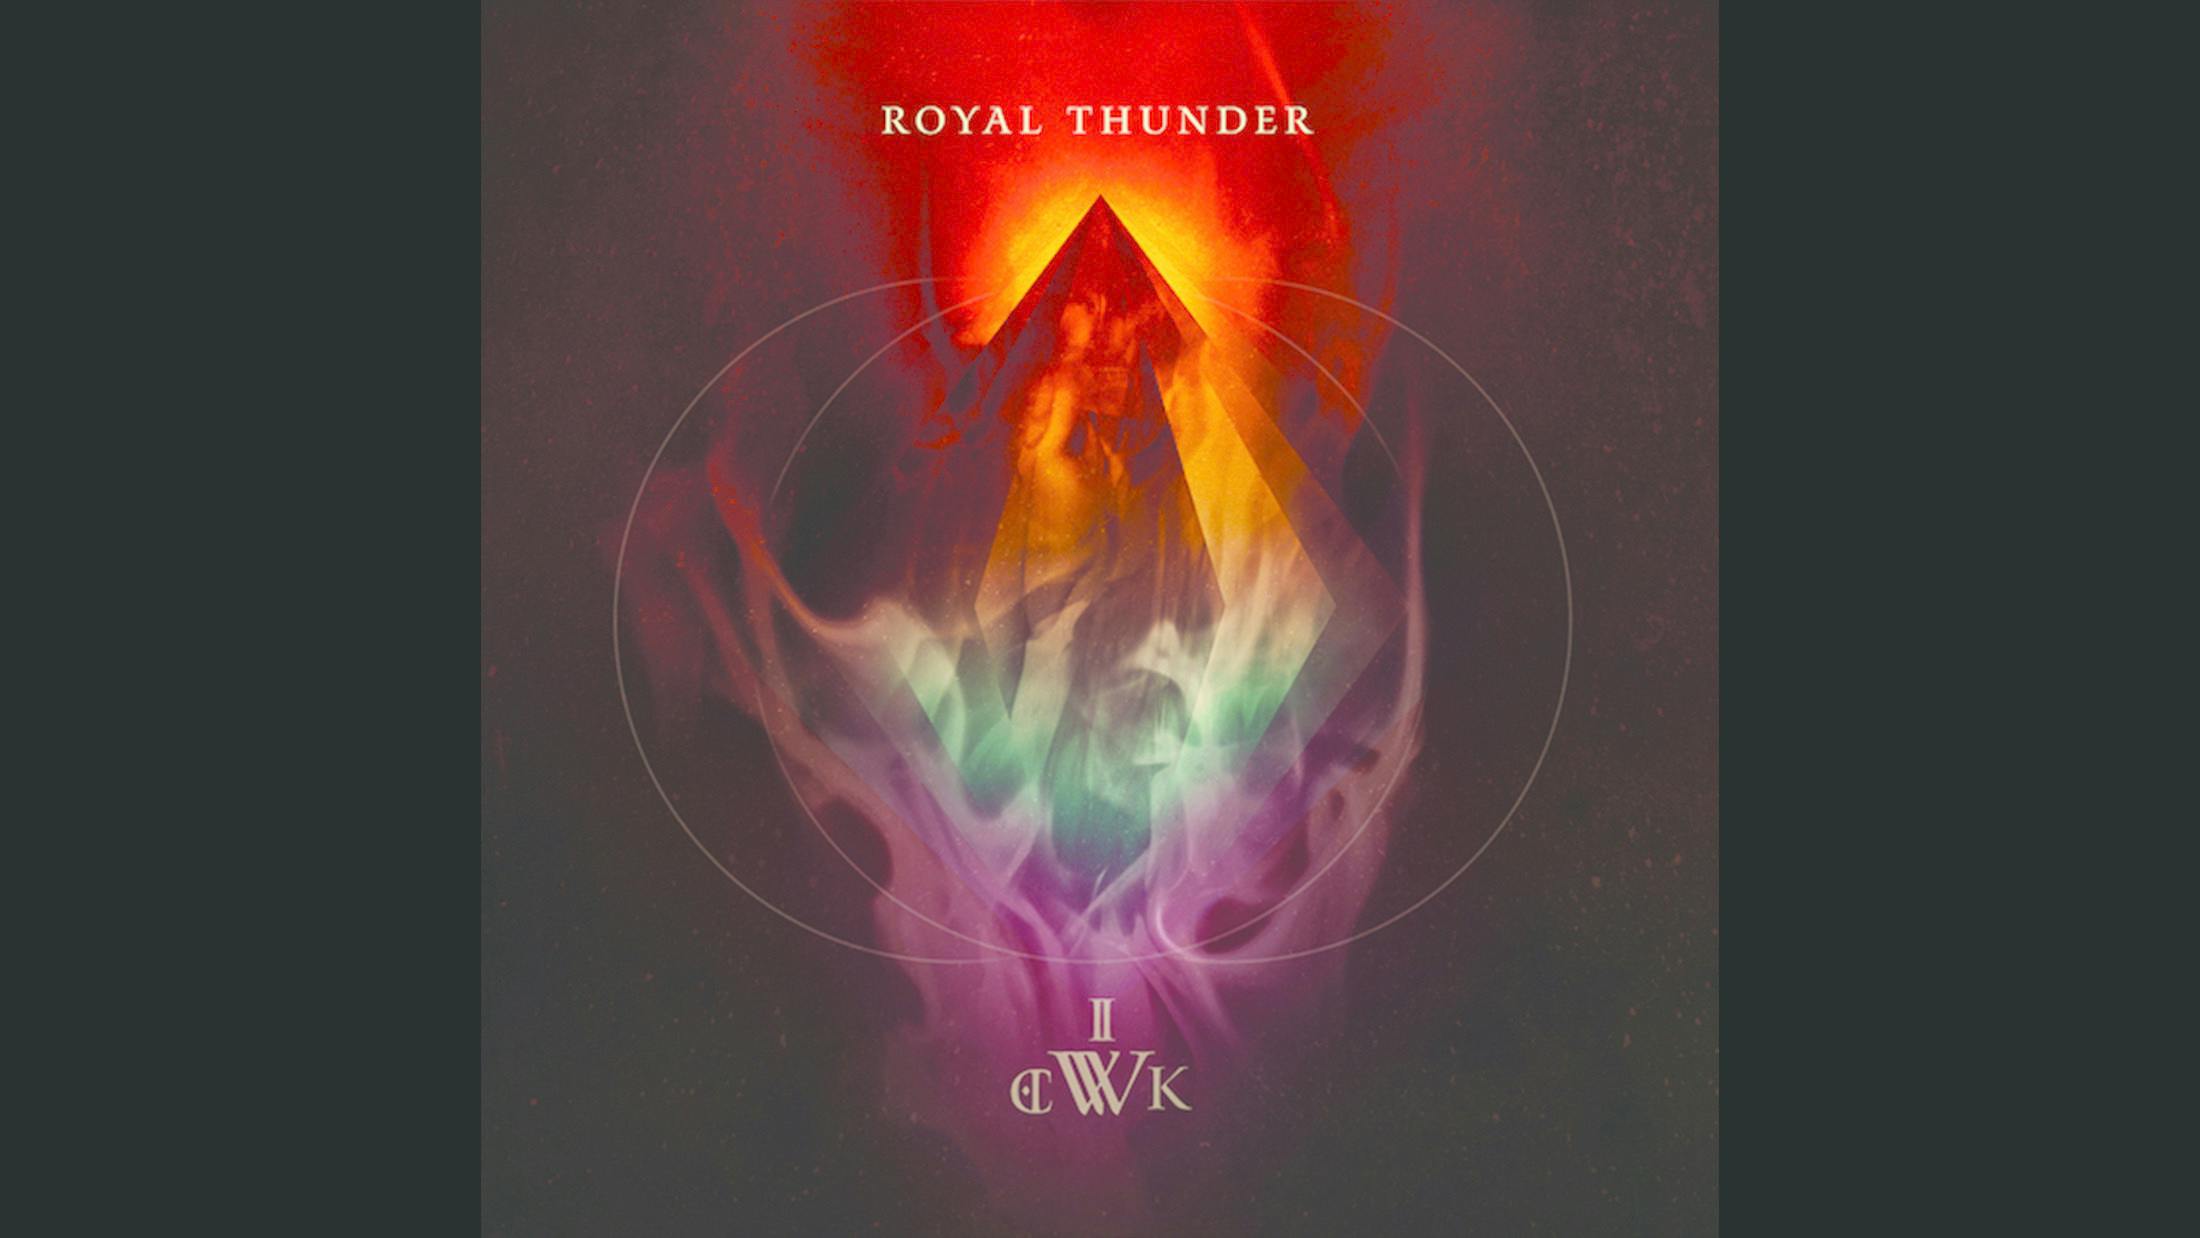 There's an esoteric magnetism wired deep inside Royal Thunder’s third full-length that sucks you into the very eye of their storm. With its dark, moody atmospherics, warm fuzzy guitars and soul-baring vocals, the Atlanta psych-rockers have never sounded so sublime, disguising infectious rock songs as mind-melting meditative trances.